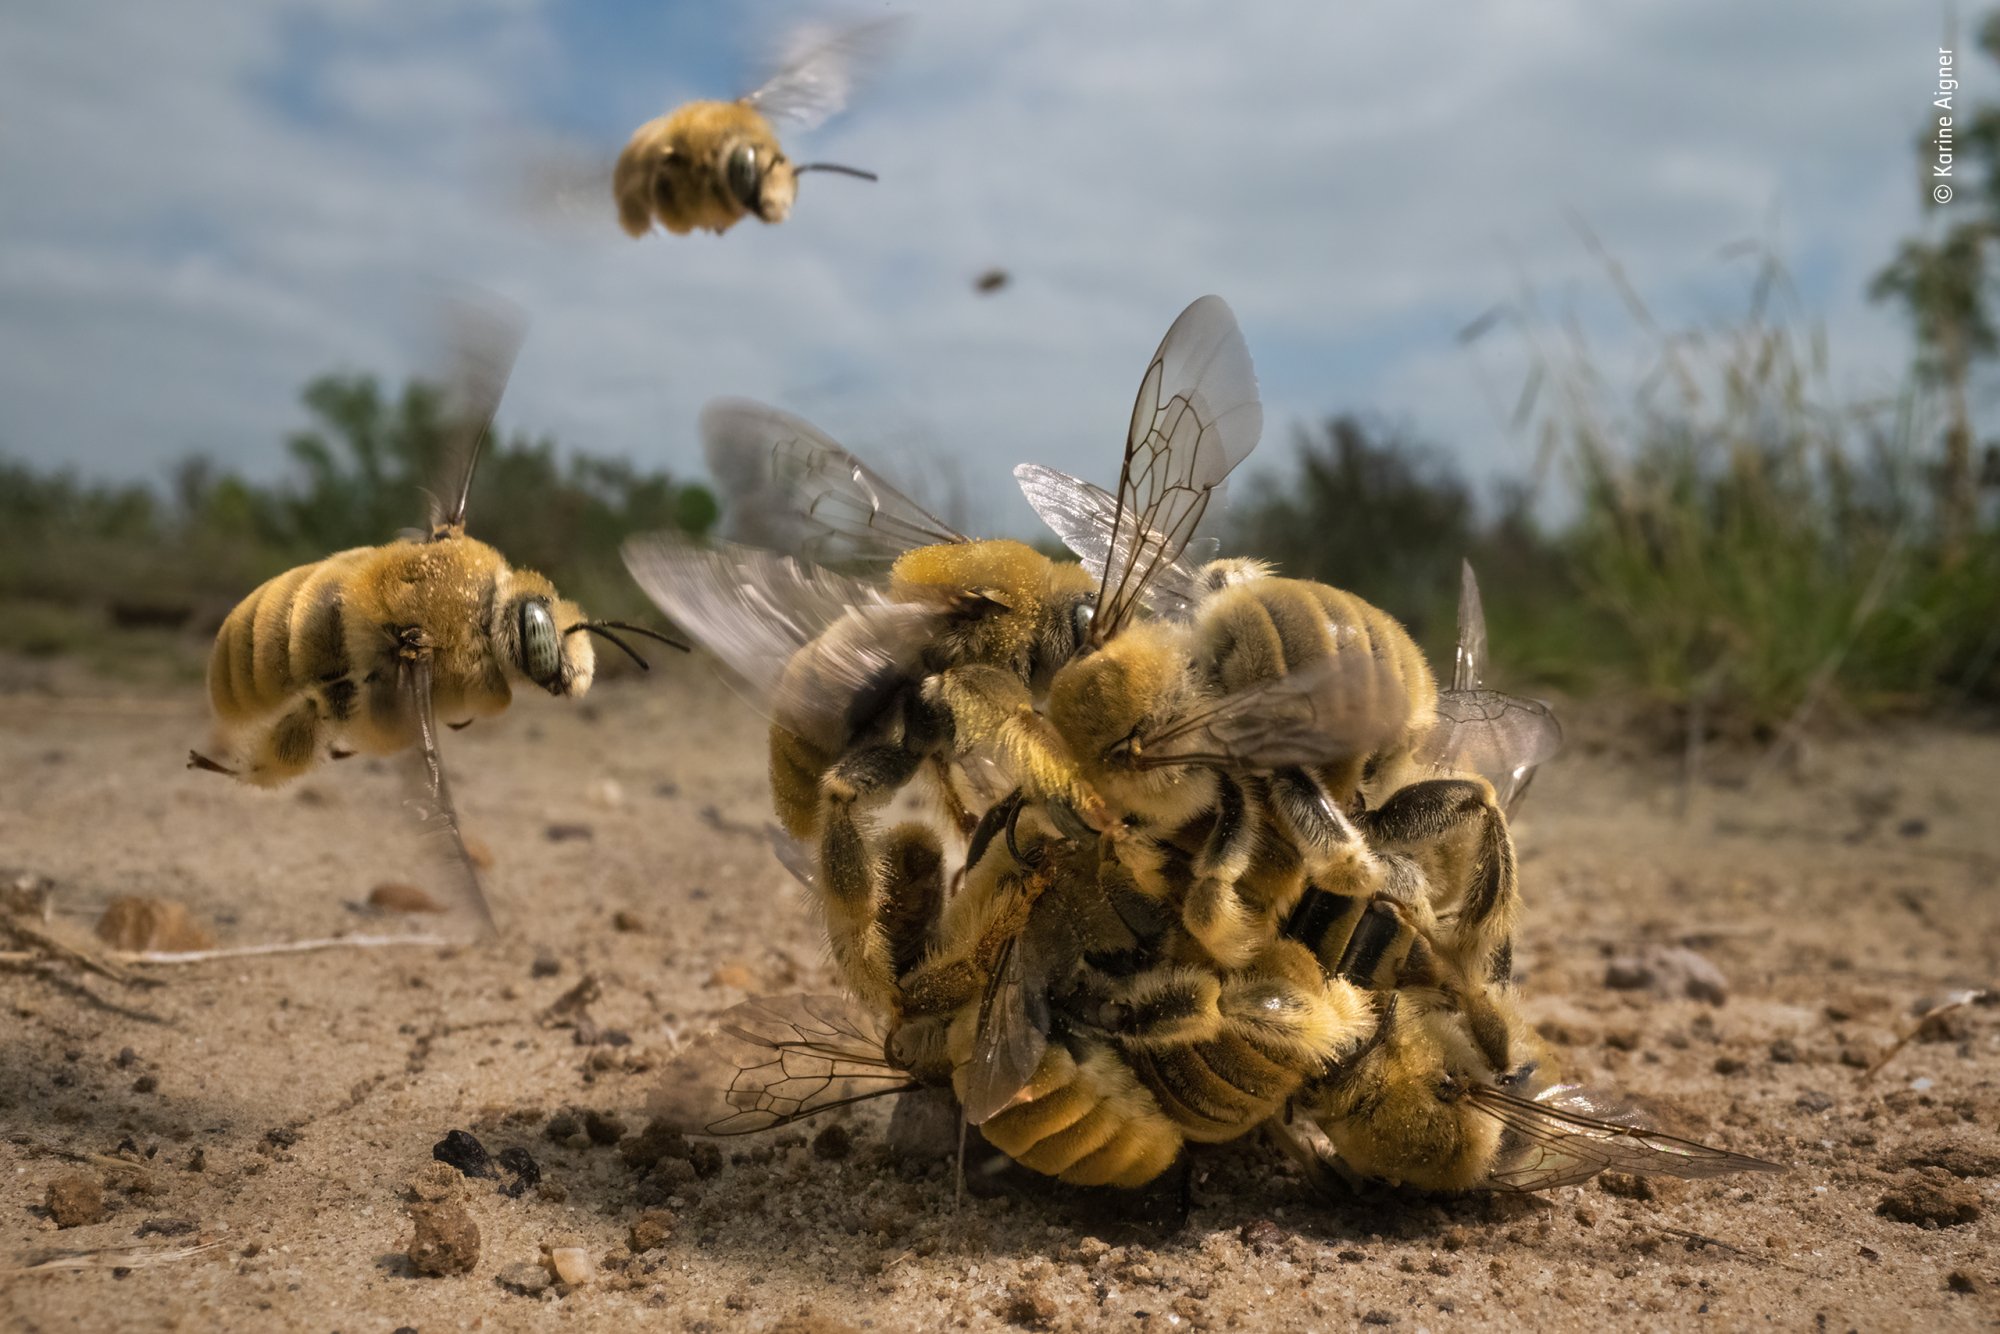 A buzzing ball of cactus bees spinning over sand.